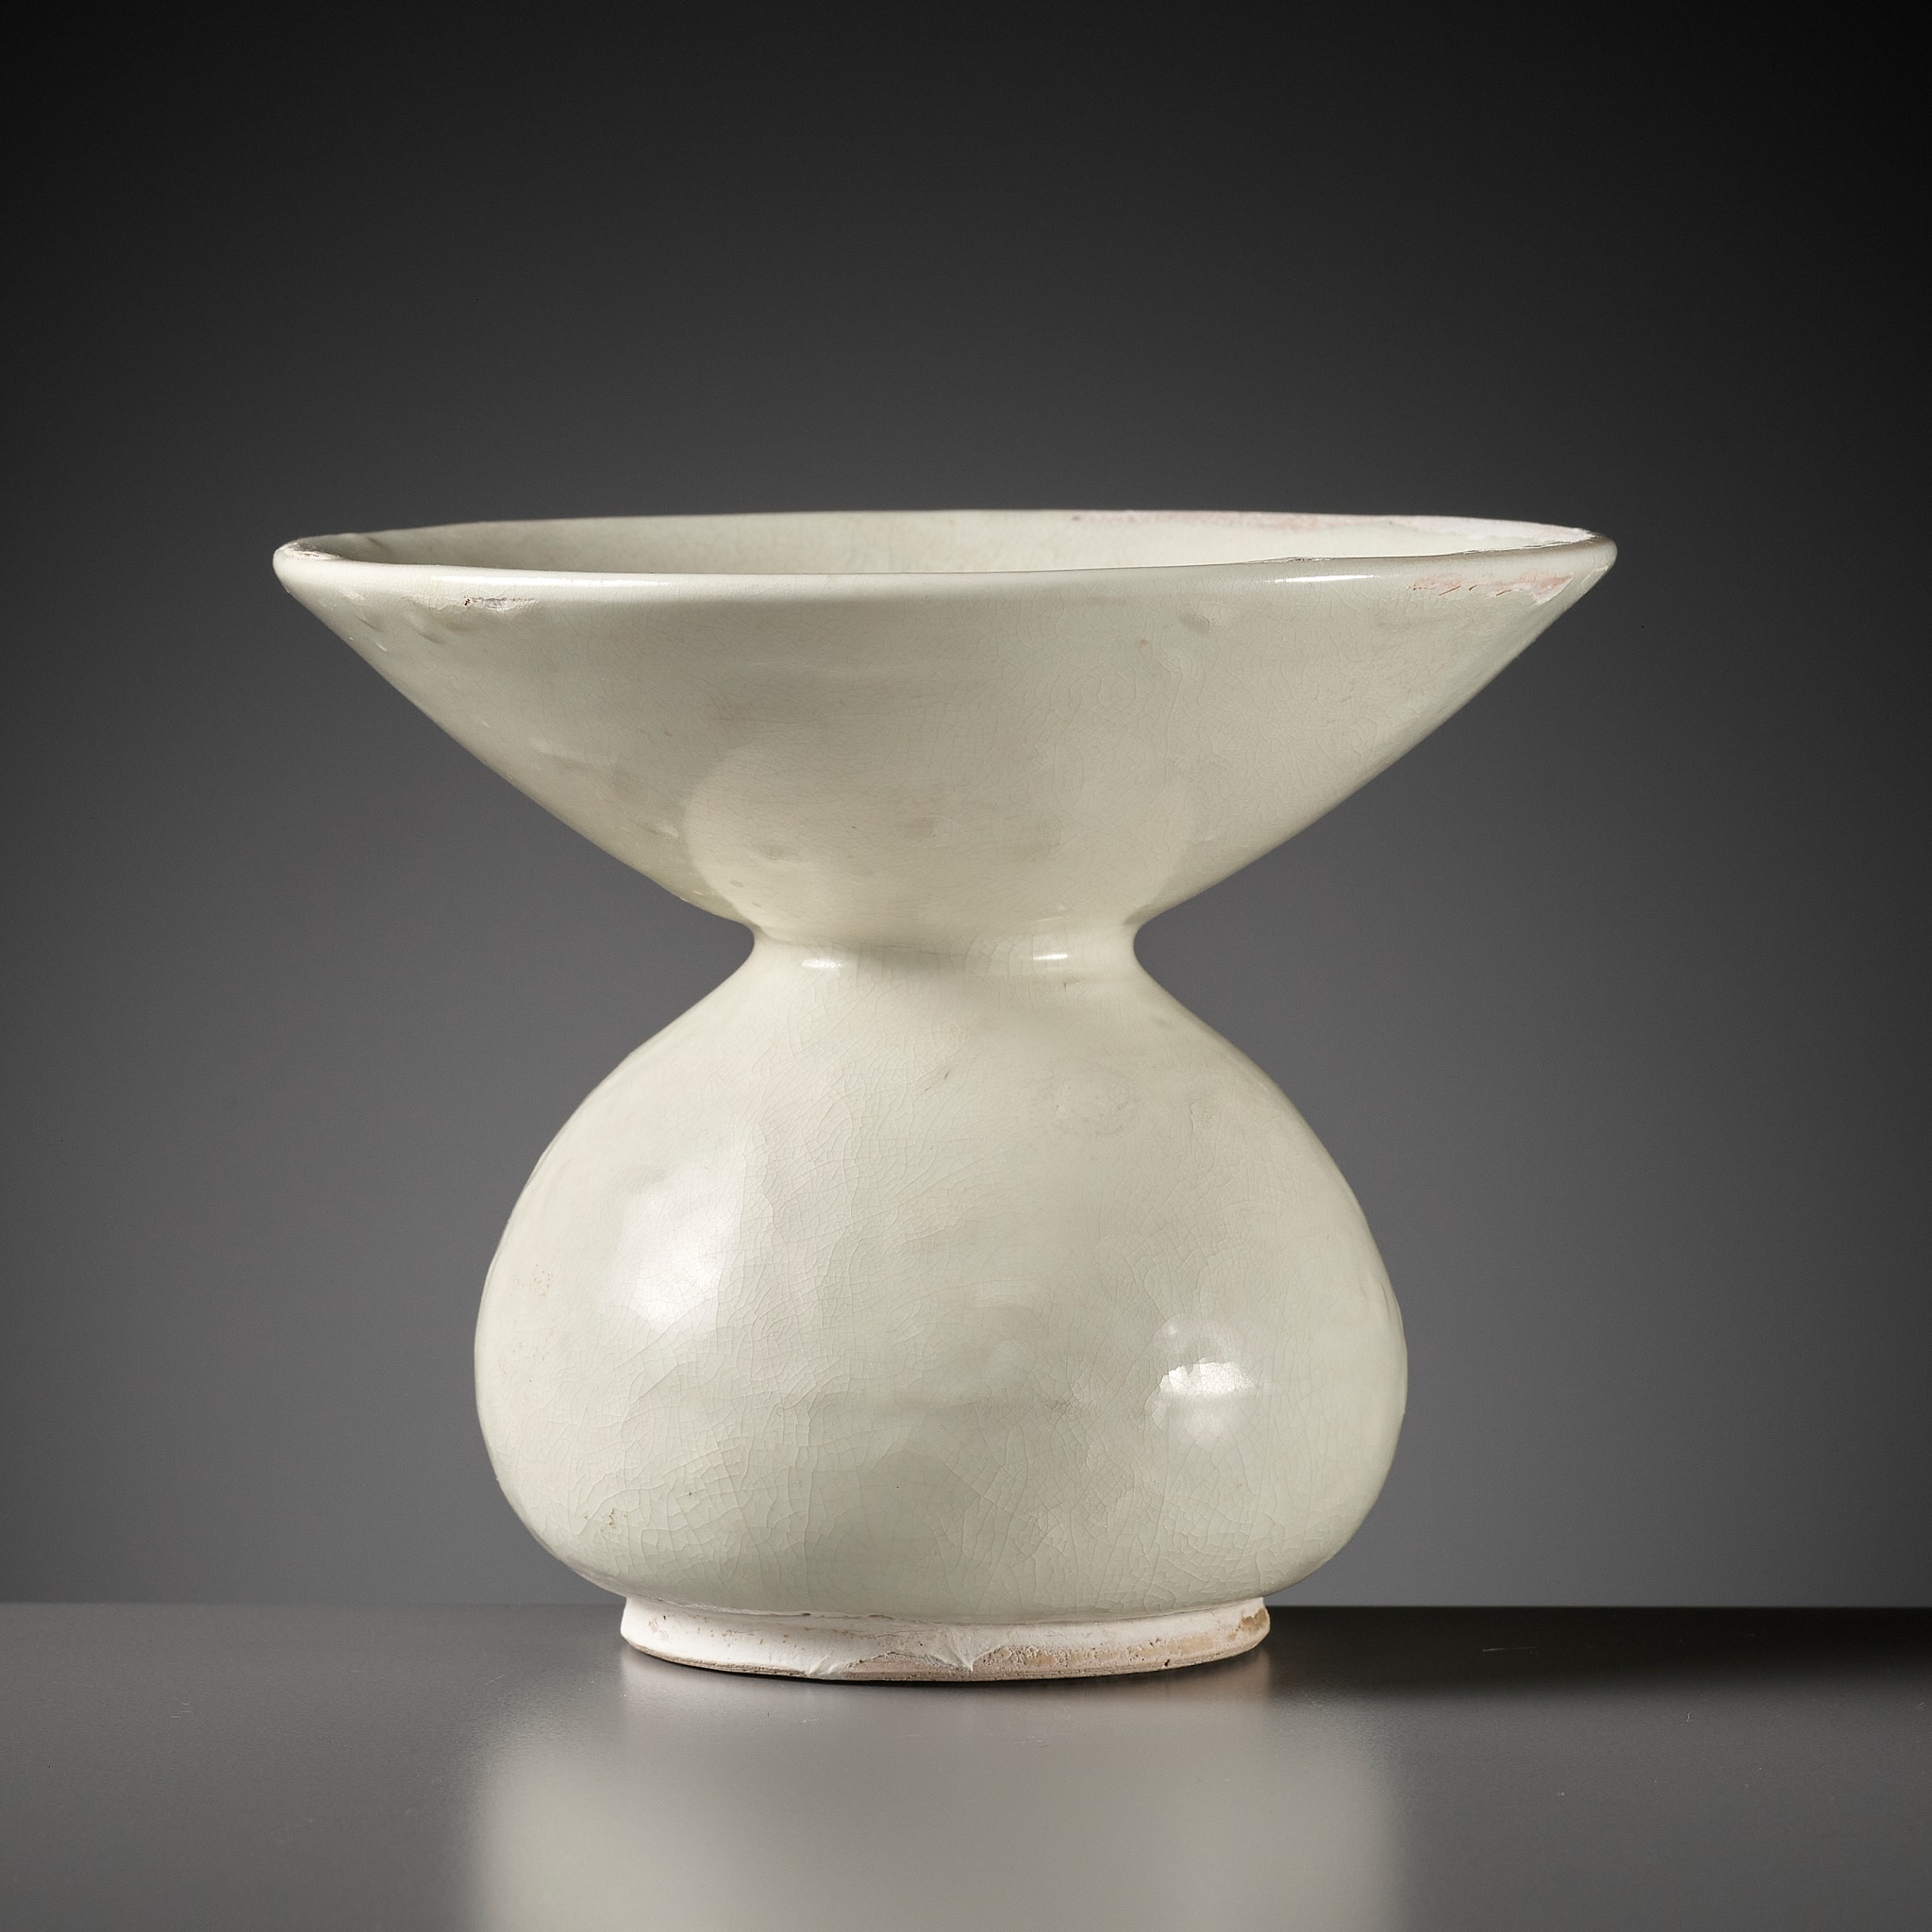 A WHITE-GLAZED XING ZHADOU, LATE TANG DYNASTY TO FIVE DYNASTIES PERIOD - Image 16 of 16